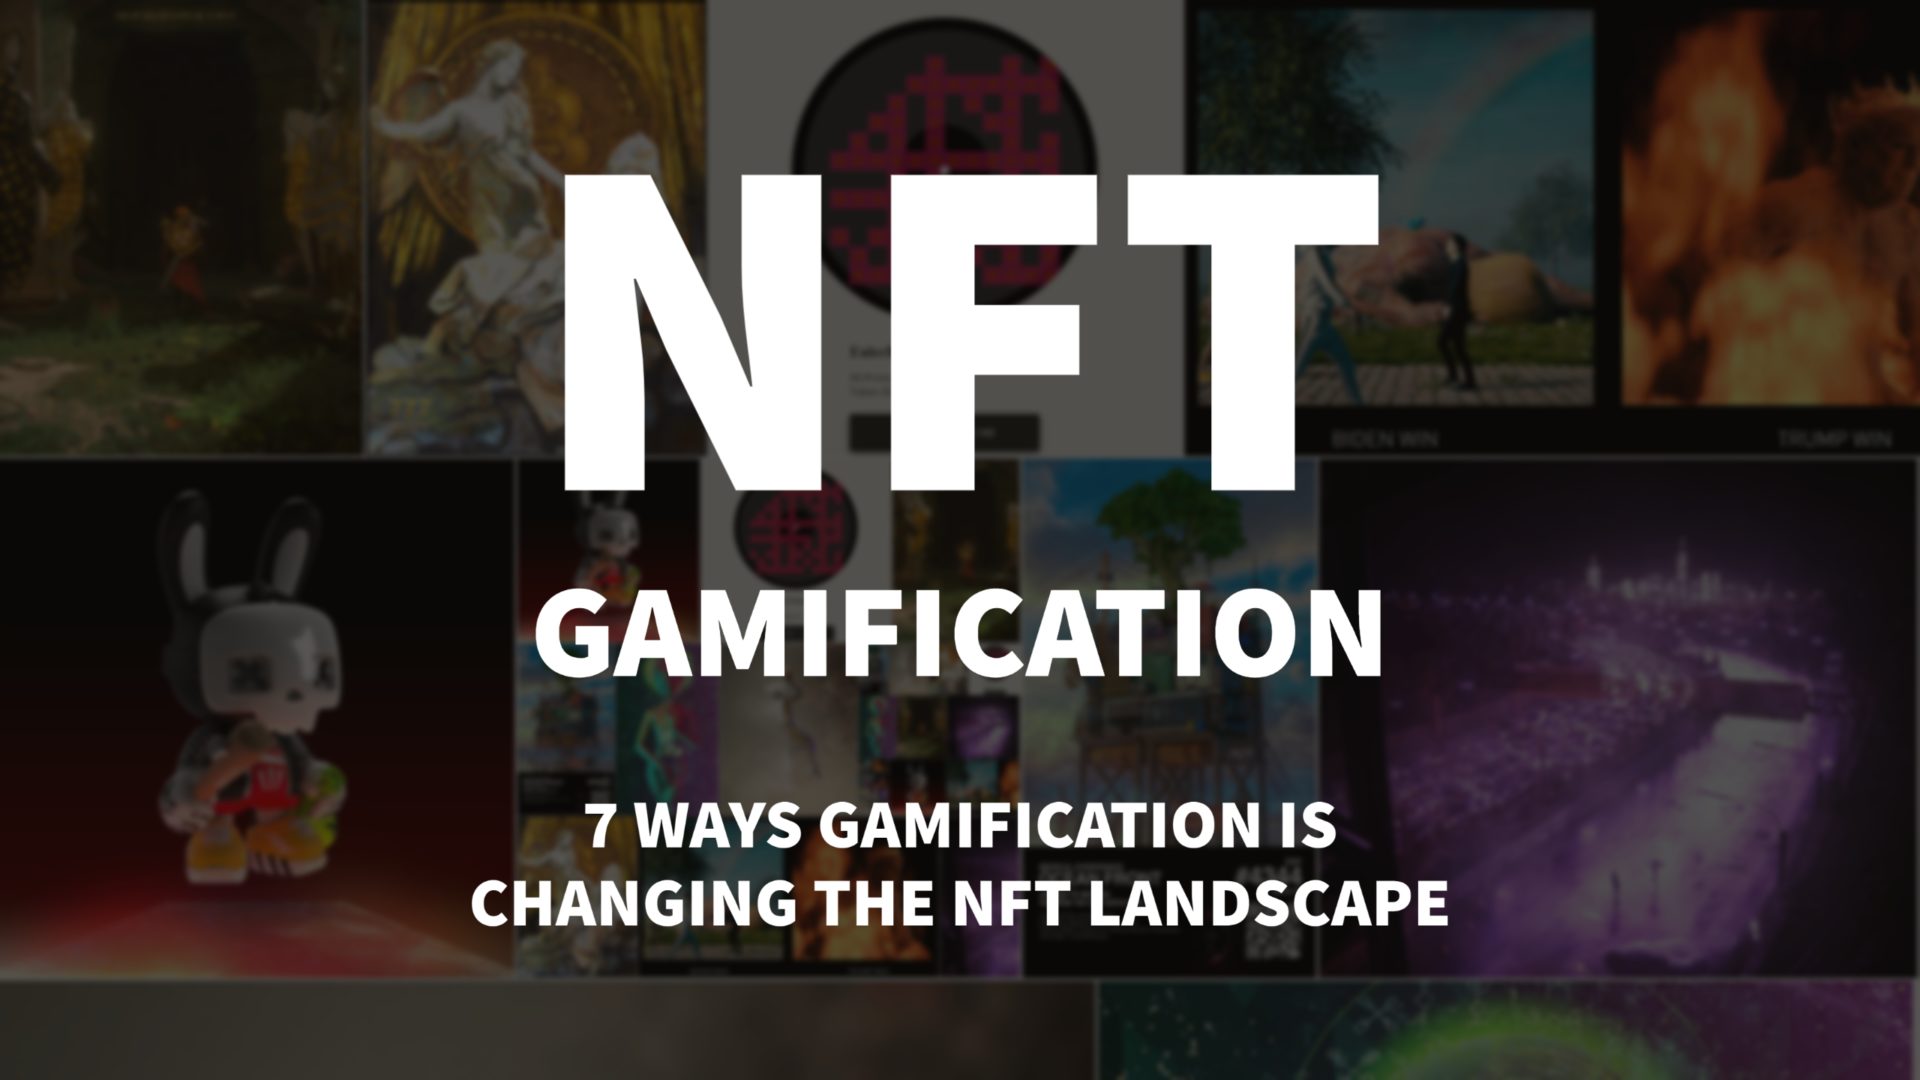 NFT Gamification: 7 Ways Crypto artists are using NFTs to engage with collectors